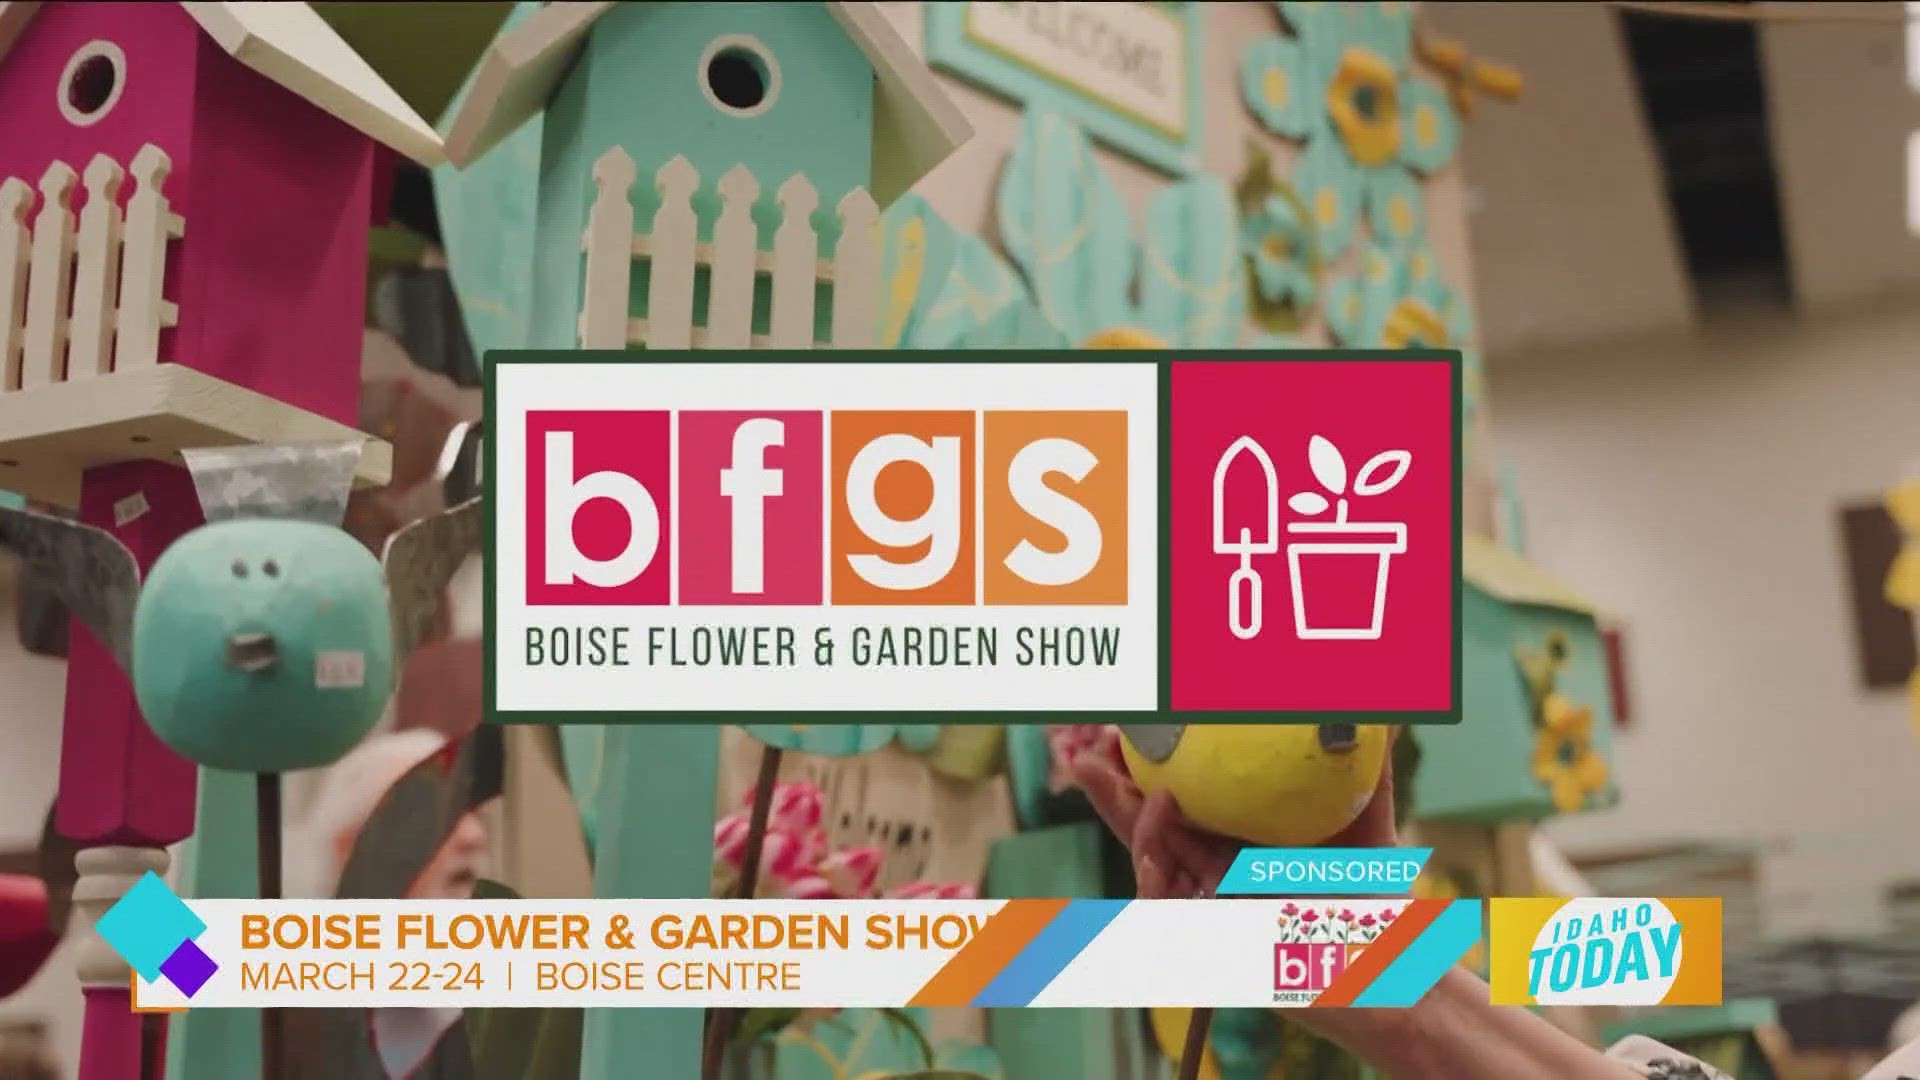 The Boise Flower and Garden Show is back! Every year the premier event showcases the greenest thumbs around! Sponsored by: The Boise Flower And Garden Show